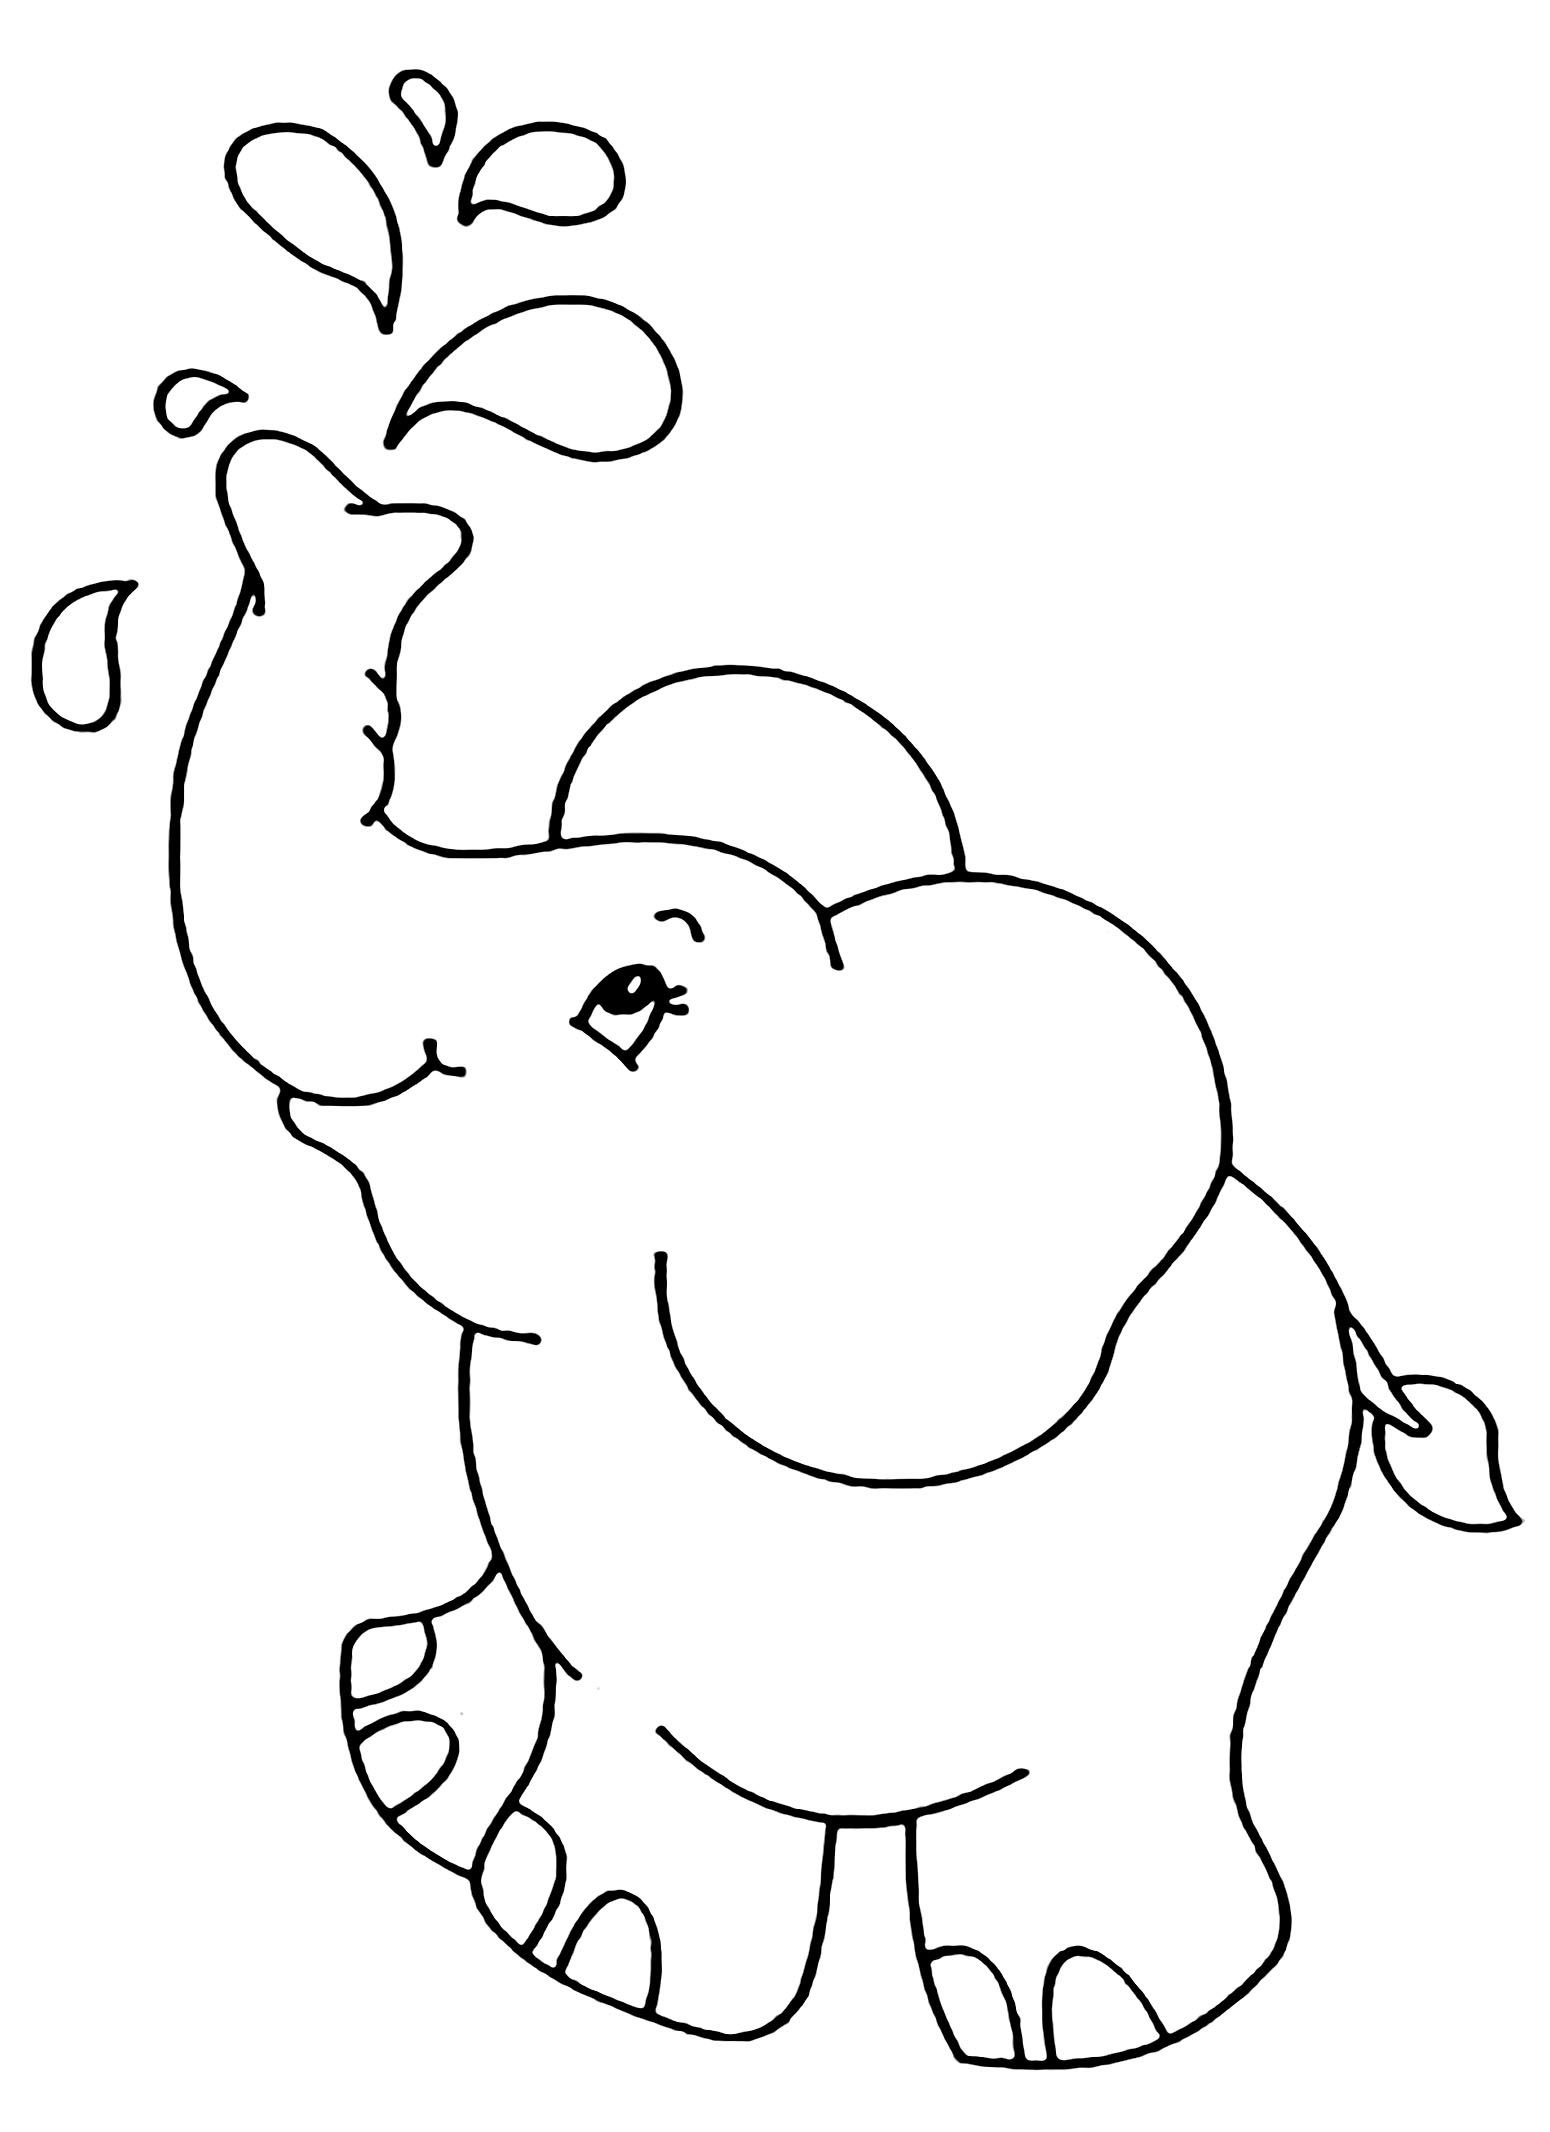 Download Elephants Free To Color For Kids Elephants Kids Coloring Pages